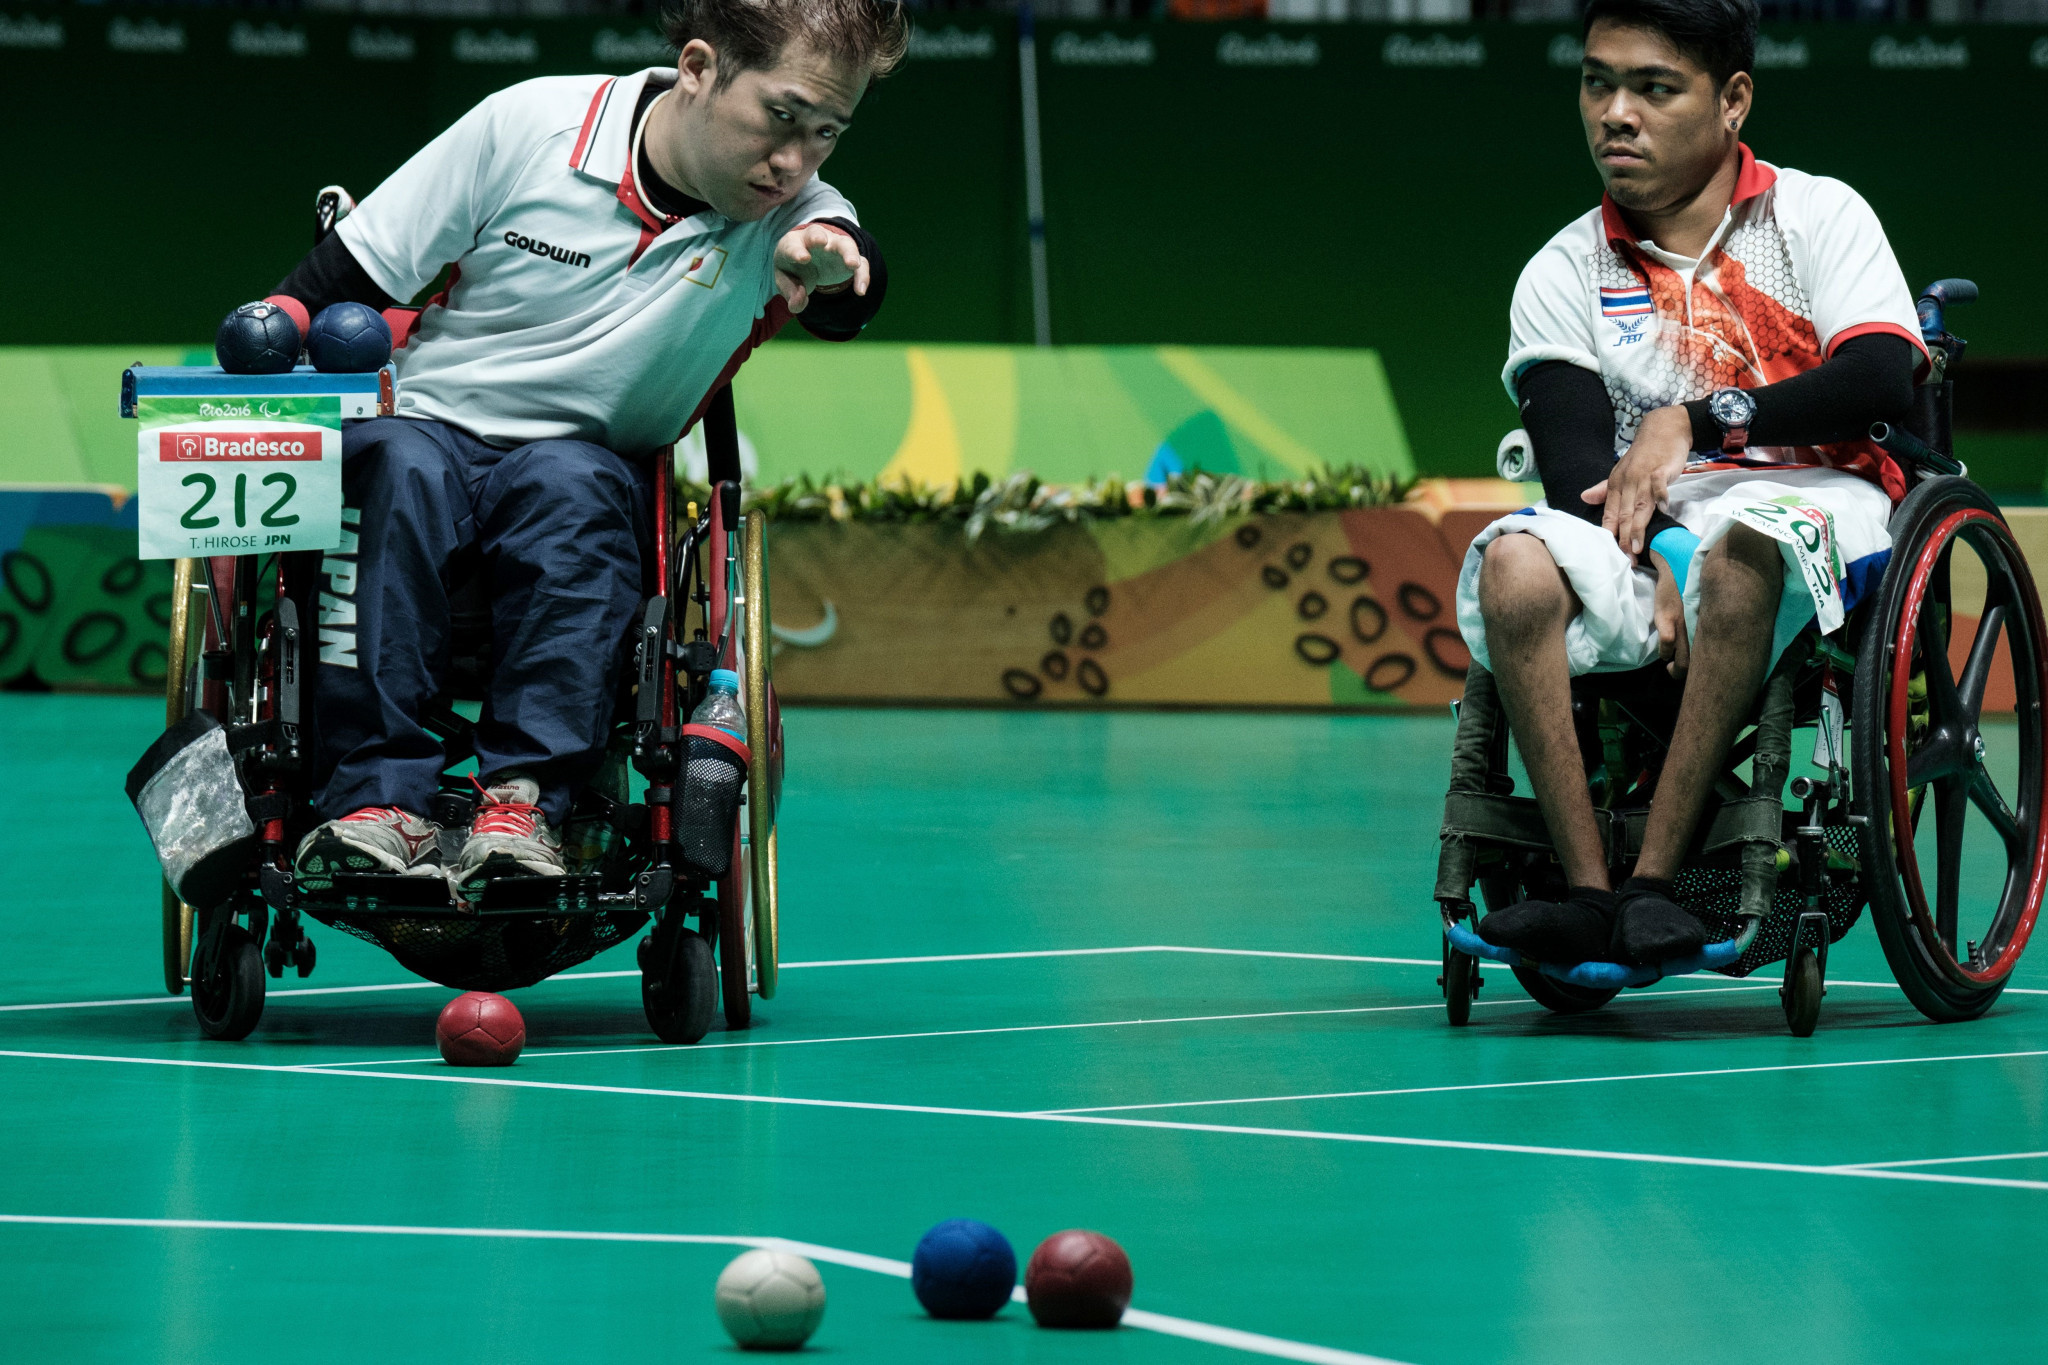 Tokyo Governor Yuriko Koike spoke of the growth of boccia in Japan ©Getty Images